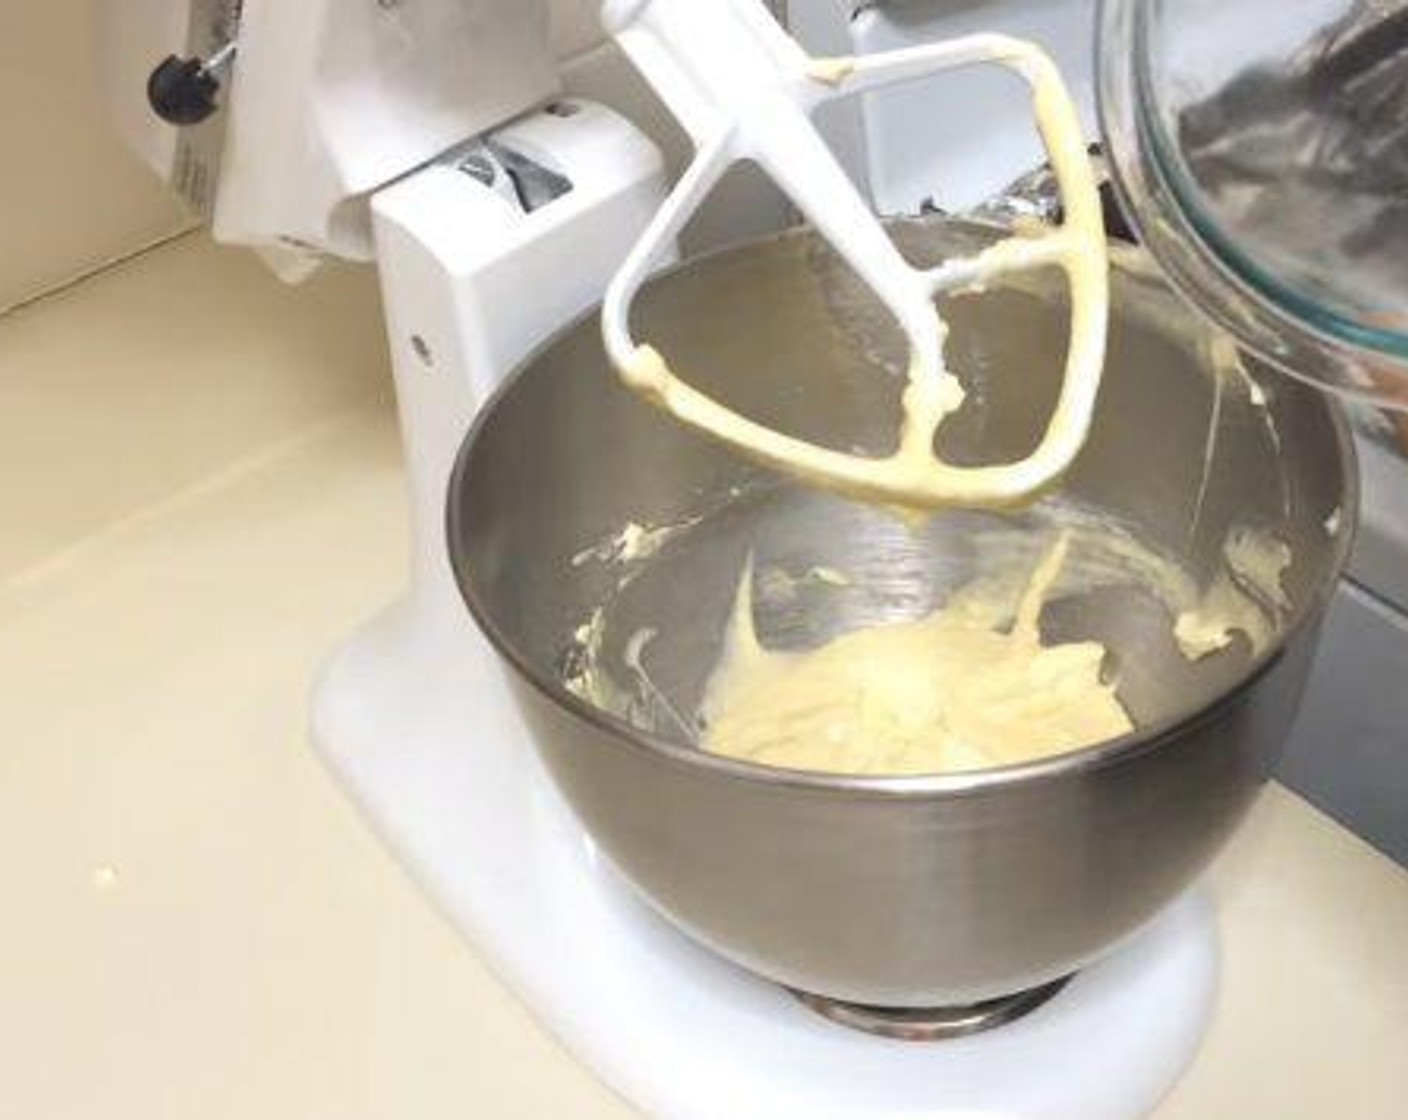 step 1 Using a stand mixer, beat together the Butter (1/2 cup) and Granulated Sugar (3/4 cup). Then add in the Eggs (2), Vanilla Extract (1/2 Tbsp), All-Purpose Flour (1 1/2 cups), Baking Powder (1/2 Tbsp), Salt (1/4 tsp),and Whole Milk (1/2 cup). Combine everything well.